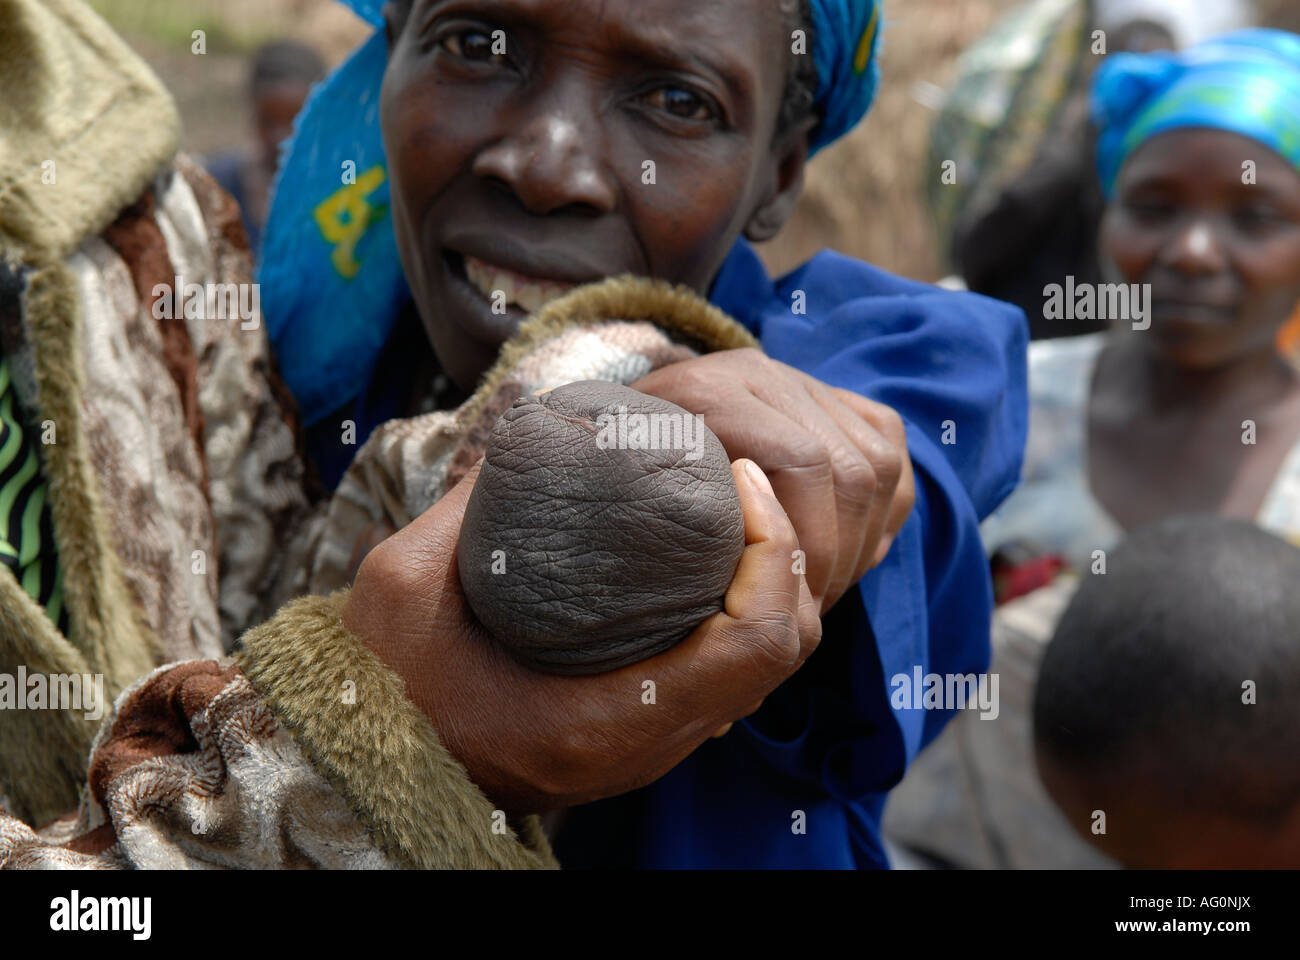 An Internally displaced woman shows her arm cut off by rebel militia fighters in an IDP camp in North Kivu province DR Congo Africa Stock Photo